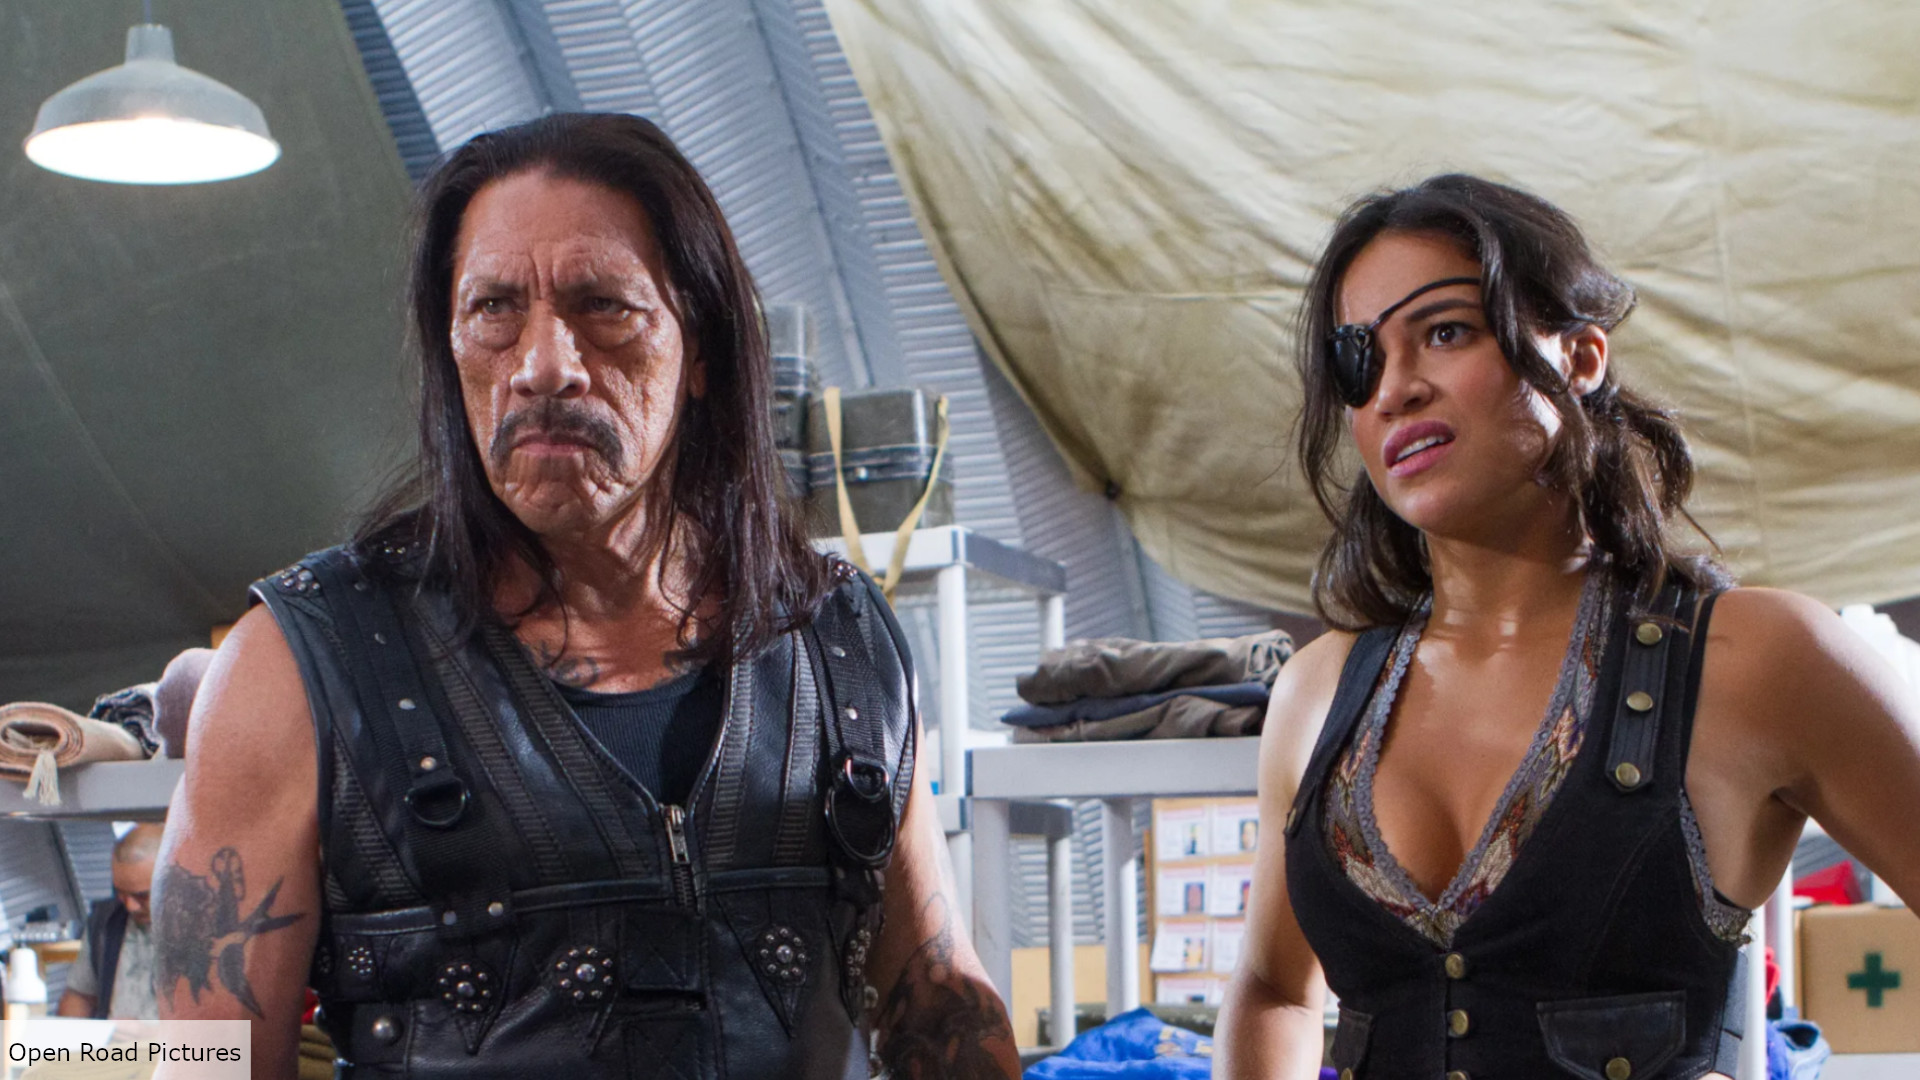 Rodriguez wants to make Machete in Space a reality | The